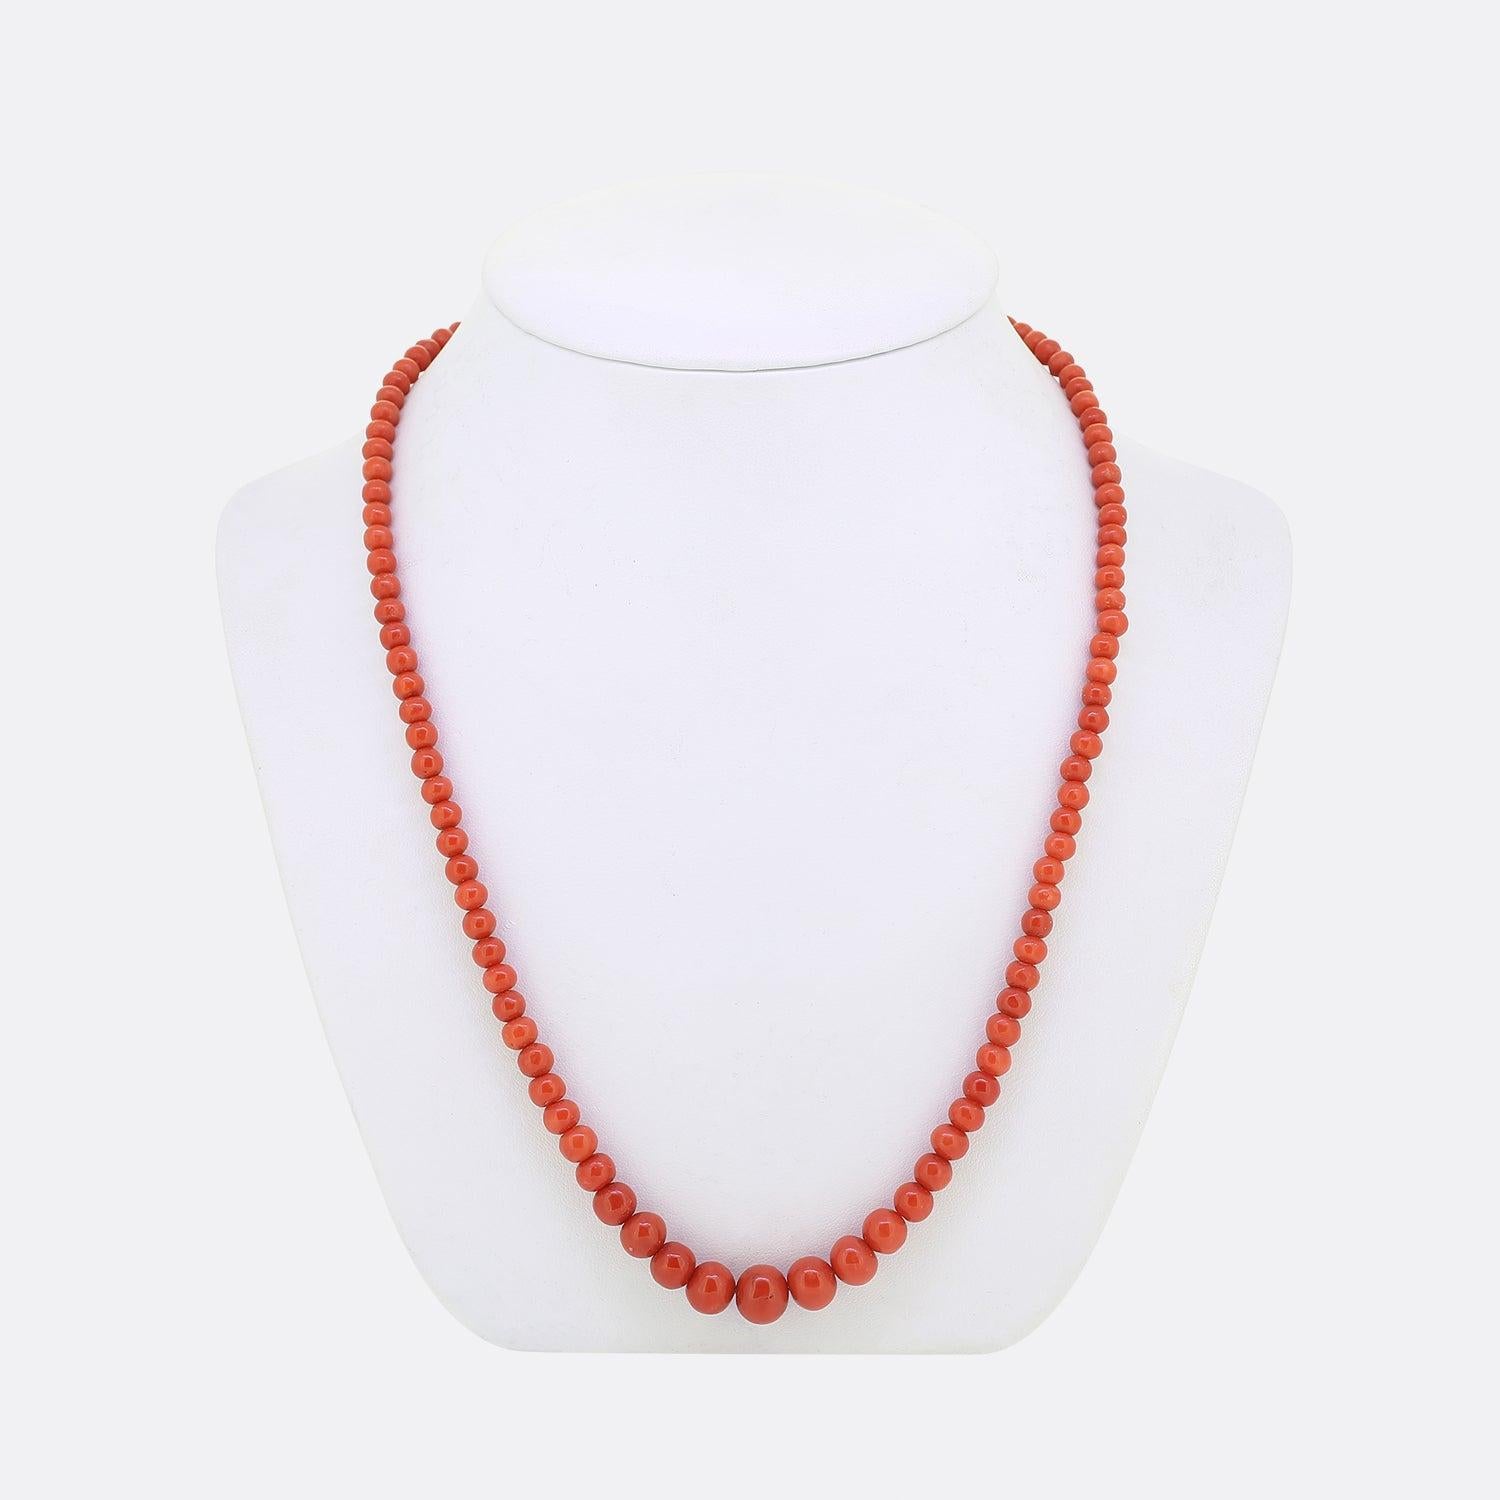 This is a vintage coral single strand necklace. The necklace features graduating coral beads with a 9ct yellow gold bolt ring clasp. 

Condition: Used (Very Good)
Weight: 22.5 grams
Coral Dimensions: Smallest 4mm, Largest 9.5mm
Length: 20